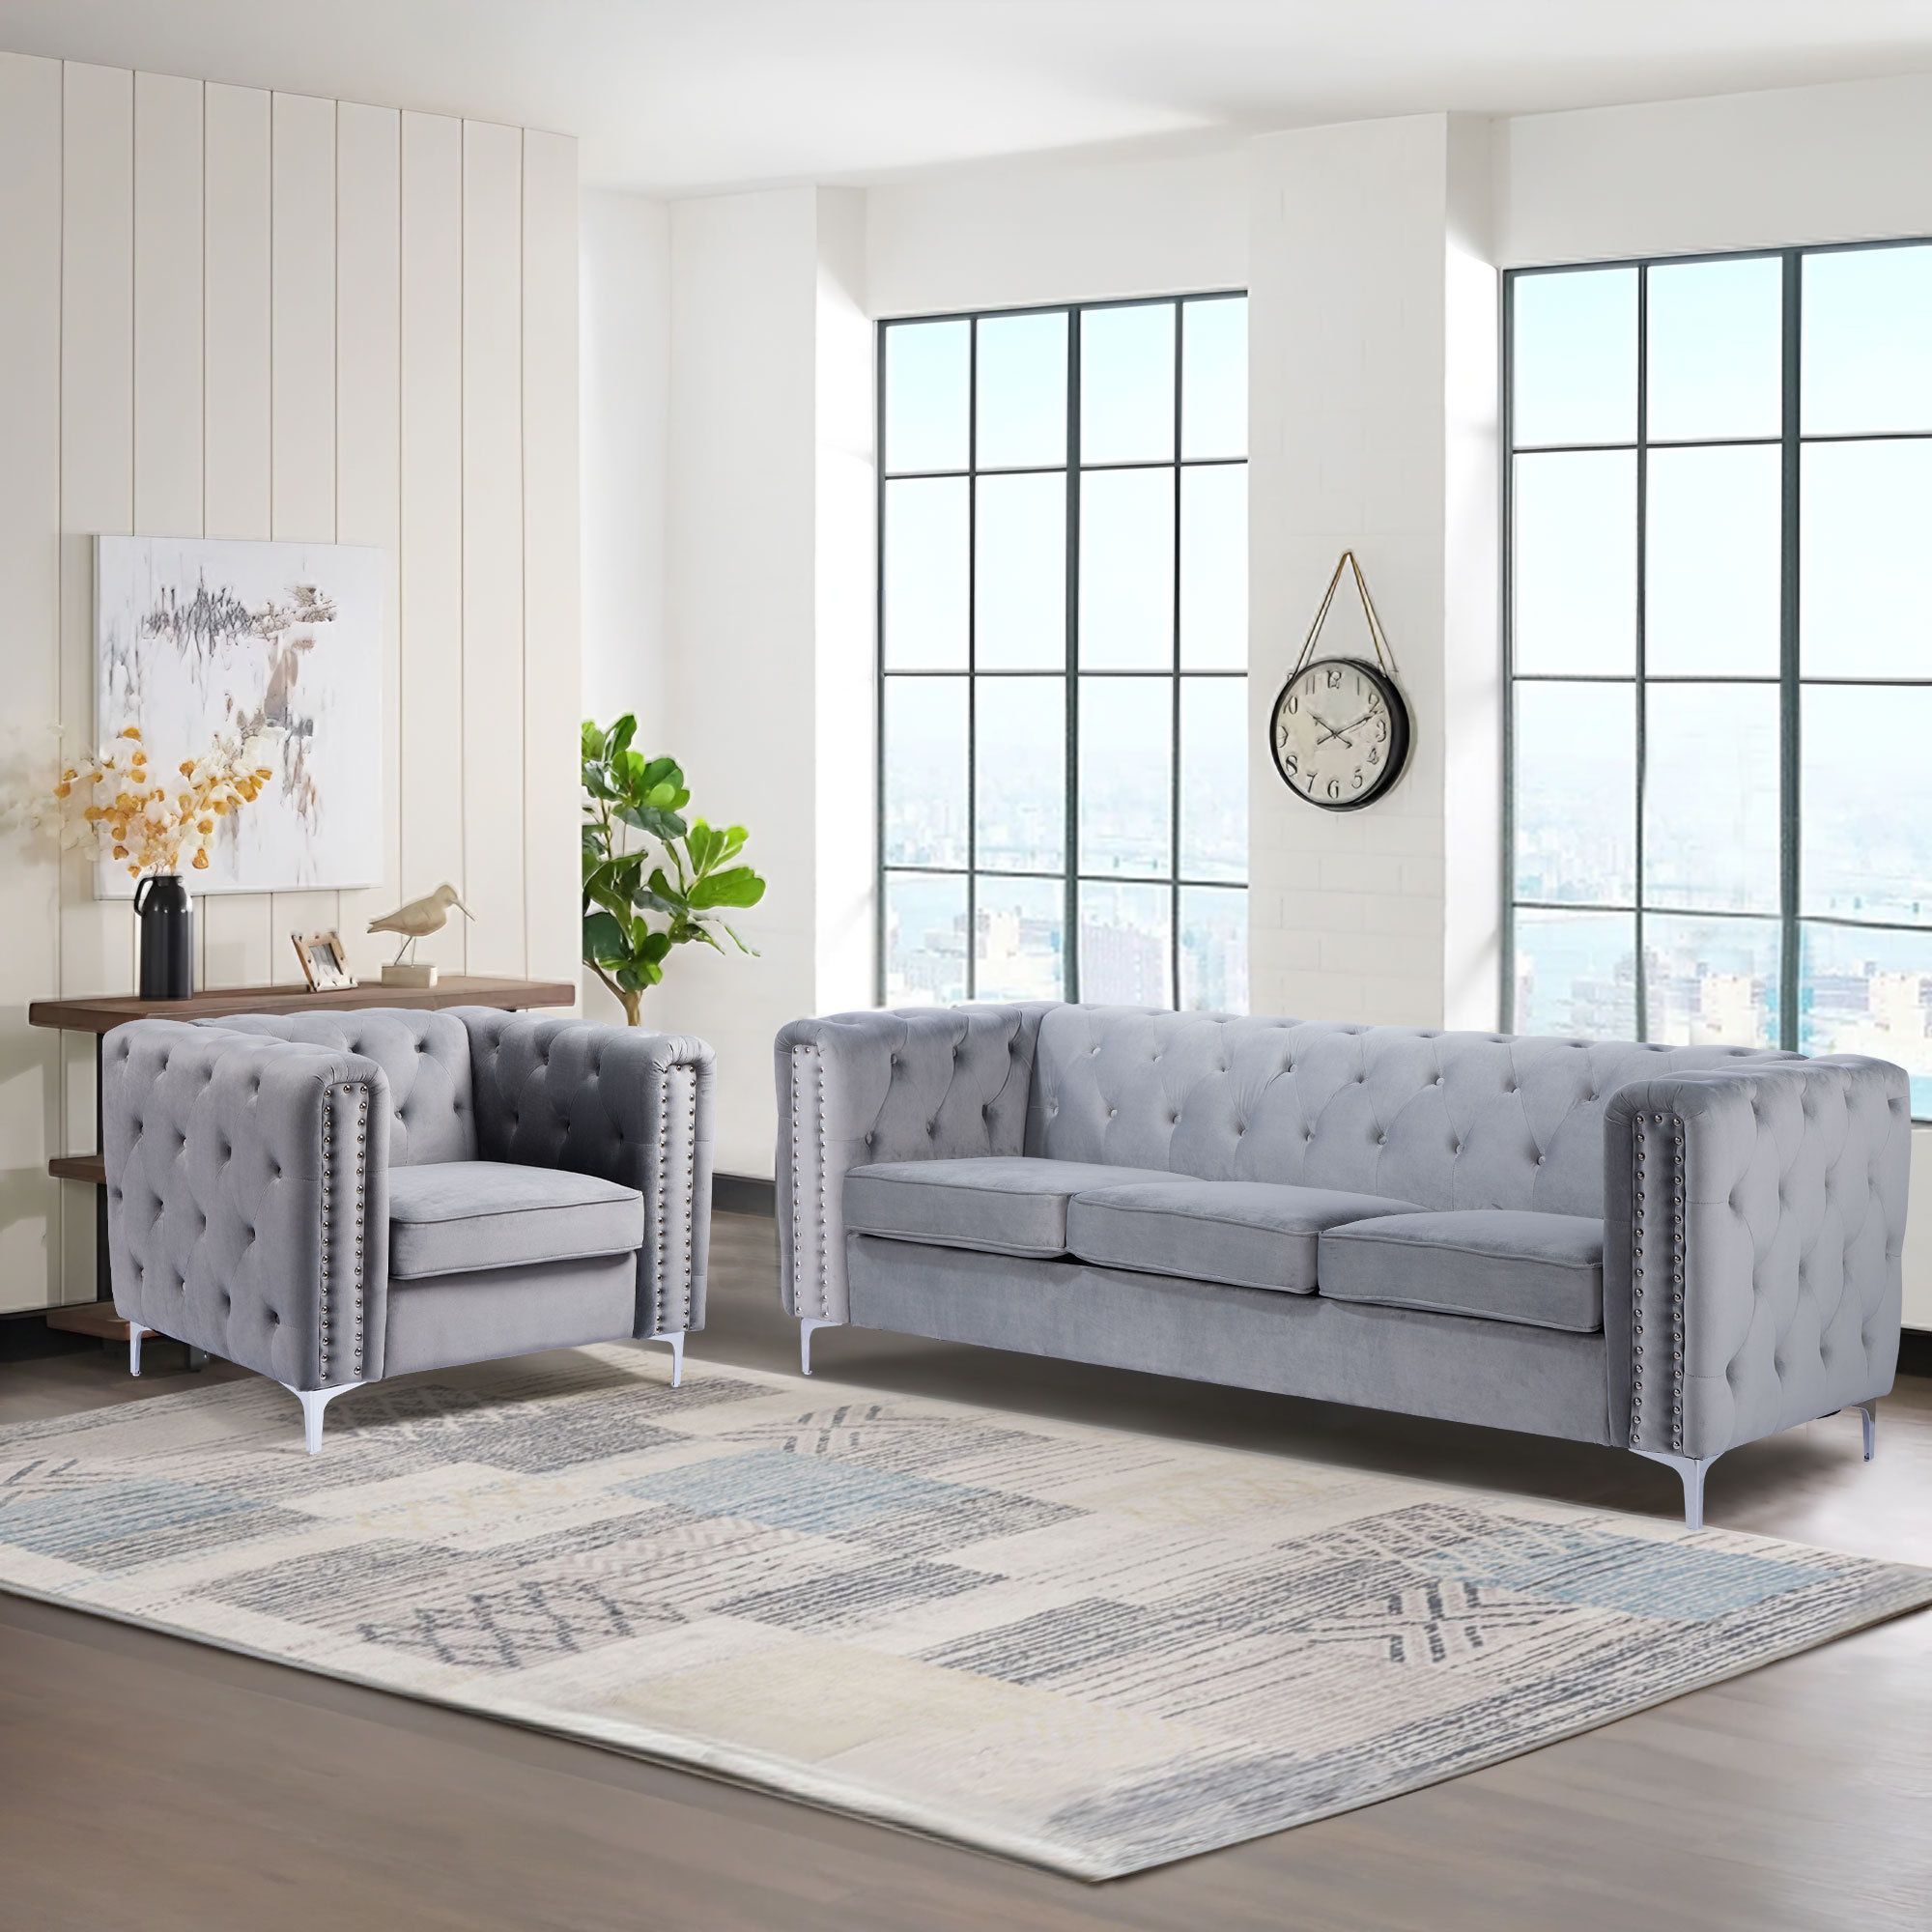 Bonzy Home Modern 2 Pieces Soft Upholstered Tufted Living Room Sofa Sets |  Wayfair For Tufted Upholstered Sofas (View 3 of 15)